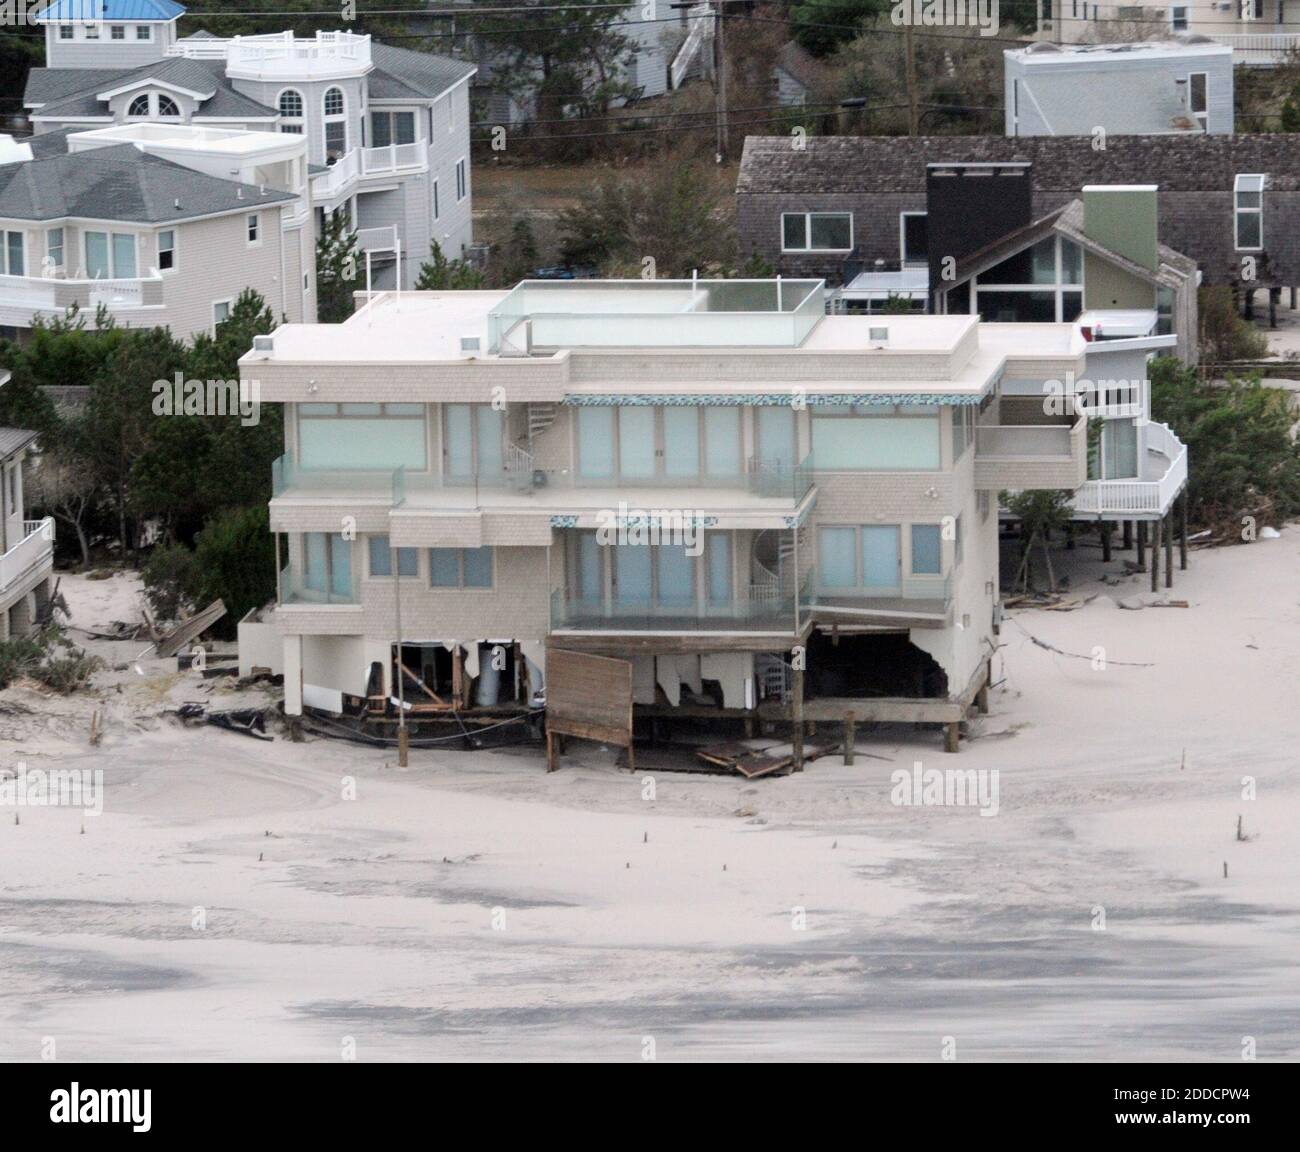 NO FILM, NO VIDEO, NO TV, NO DOCUMENTARY - A beach house in the Loveladies section of Long Beach Island on the New Jersey shore, October 30, 2012, shows damage when Hurricane Sandy blew across the New Jersey barrier islands. This portion of the road is in Harvey Cedar. Photo by Clem Murray/Philadelphia Inquirer/MCT/ABACAPRESS.COM Stock Photo